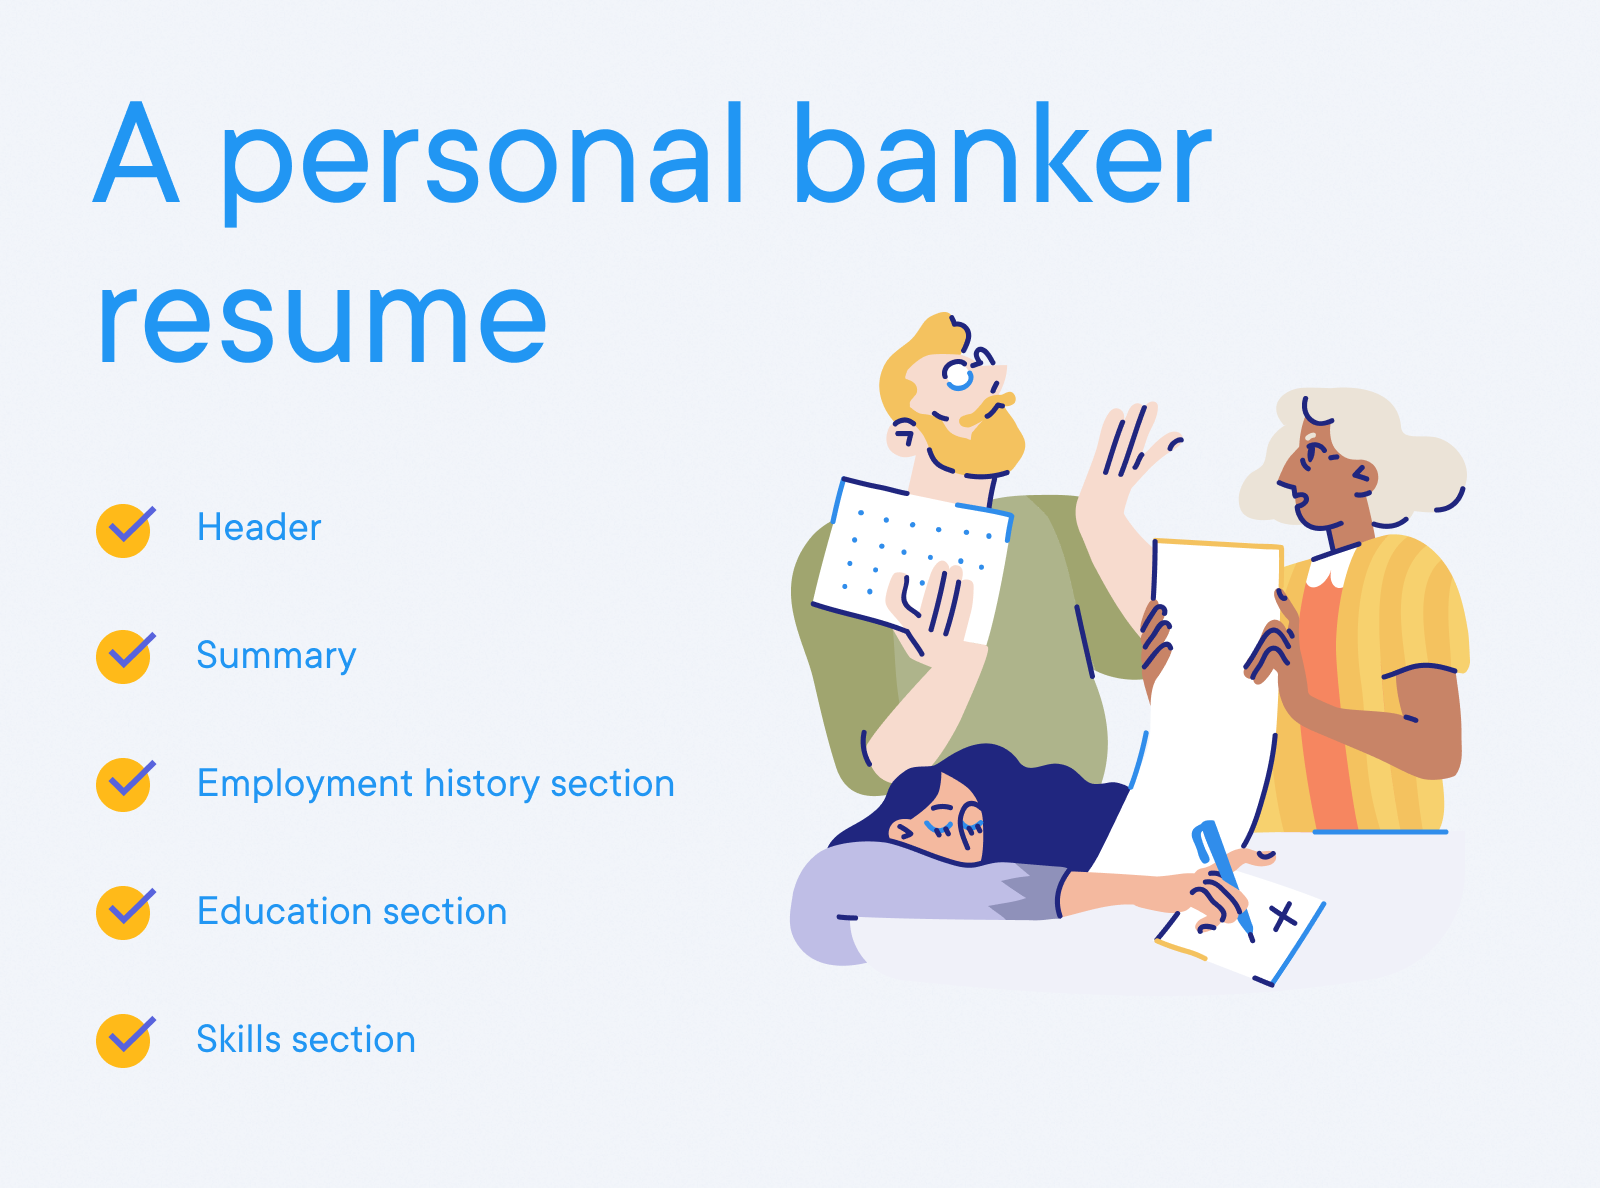 Personal Banker - How to write a personal banker resume